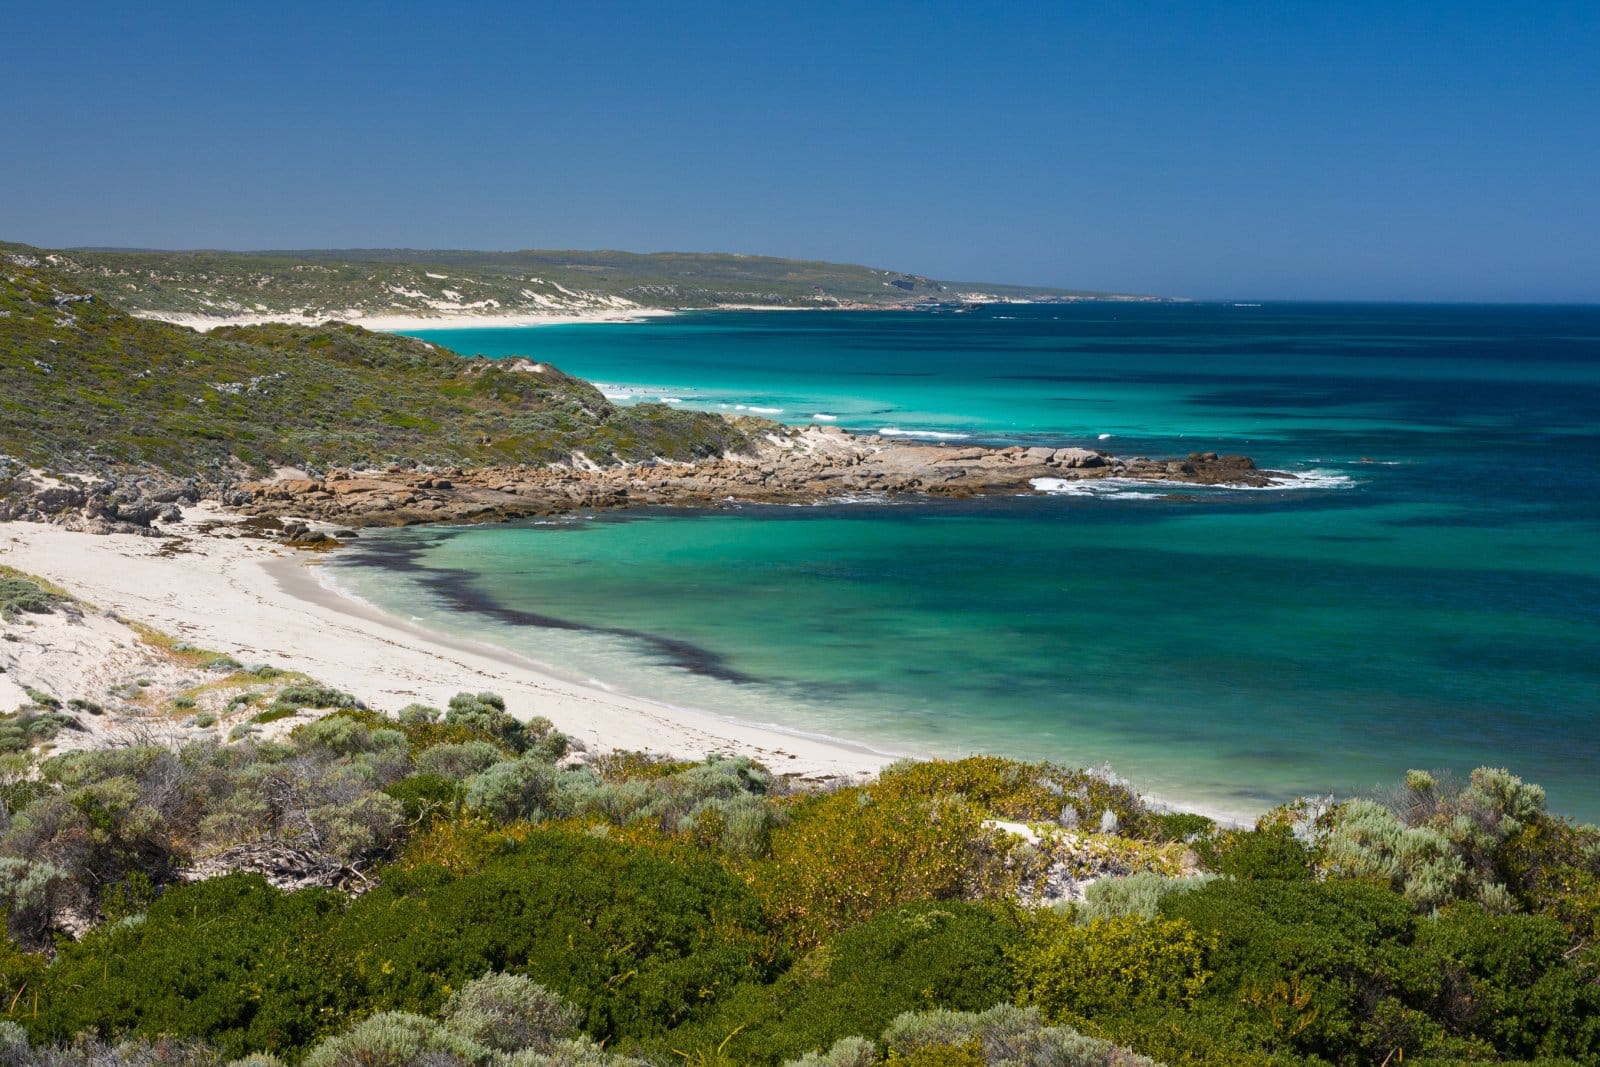 <p class="wp-caption-text">Image Credit: Shutterstock / FiledIMAGE</p>  <p><span>Margaret River is renowned for its premium wineries, stunning beaches, and surf breaks. Located in the southwest corner of Australia, this region combines the joys of gourmet food and wine with the natural beauty of ancient forests and coastal scenery. Visitors can indulge in wine tastings at world-class vineyards, explore limestone caves, hike coastal trails, and enjoy the region’s laid-back lifestyle. Margaret River also hosts various cultural events throughout the year, including food and wine festivals celebrating its culinary excellence.</span></p>